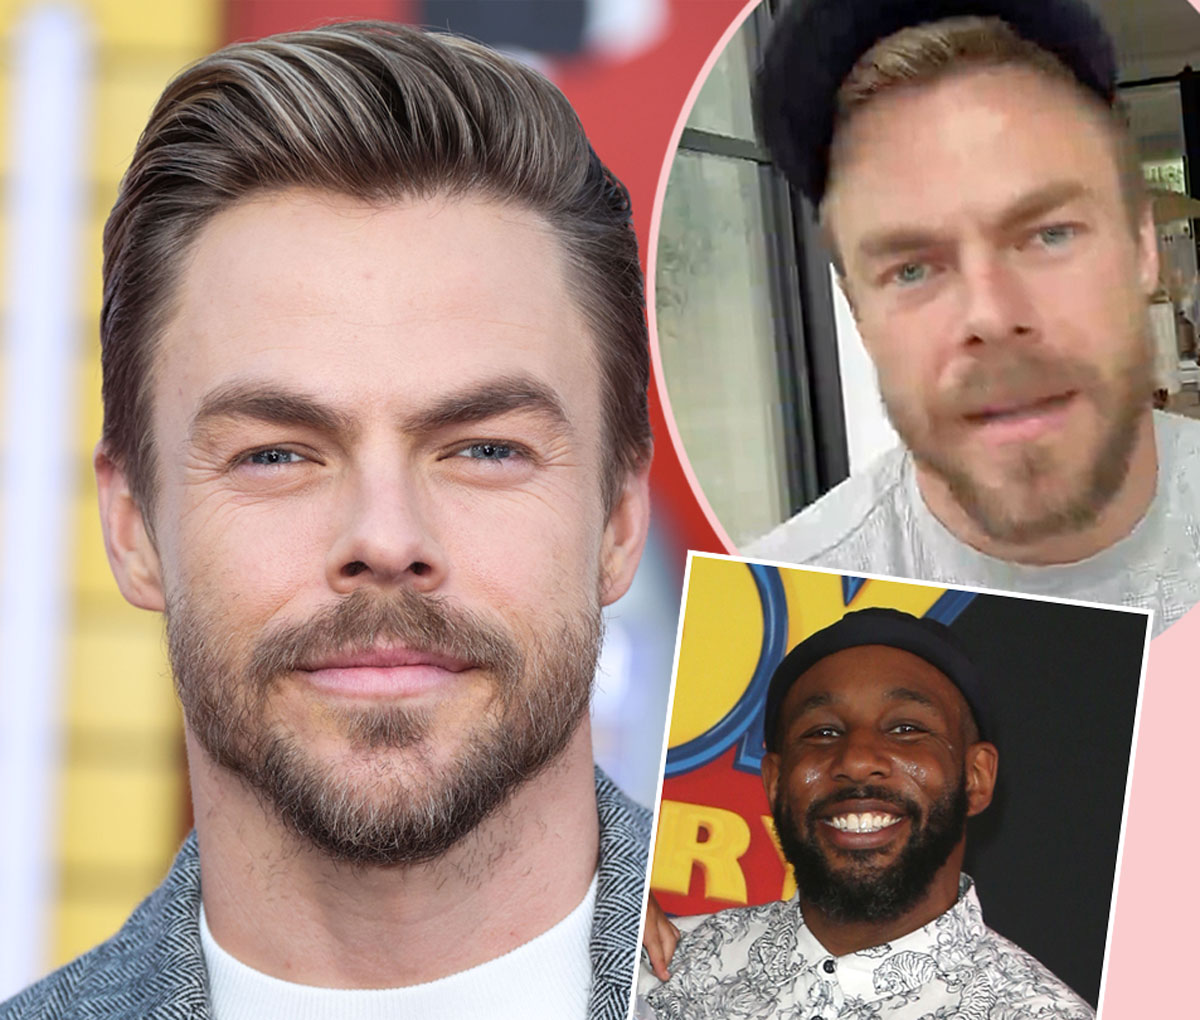 #Derek Hough Gets Emotional Revealing He Just Lost Someone Else To Suicide Right Before Stephen ‘tWitch’ Boss